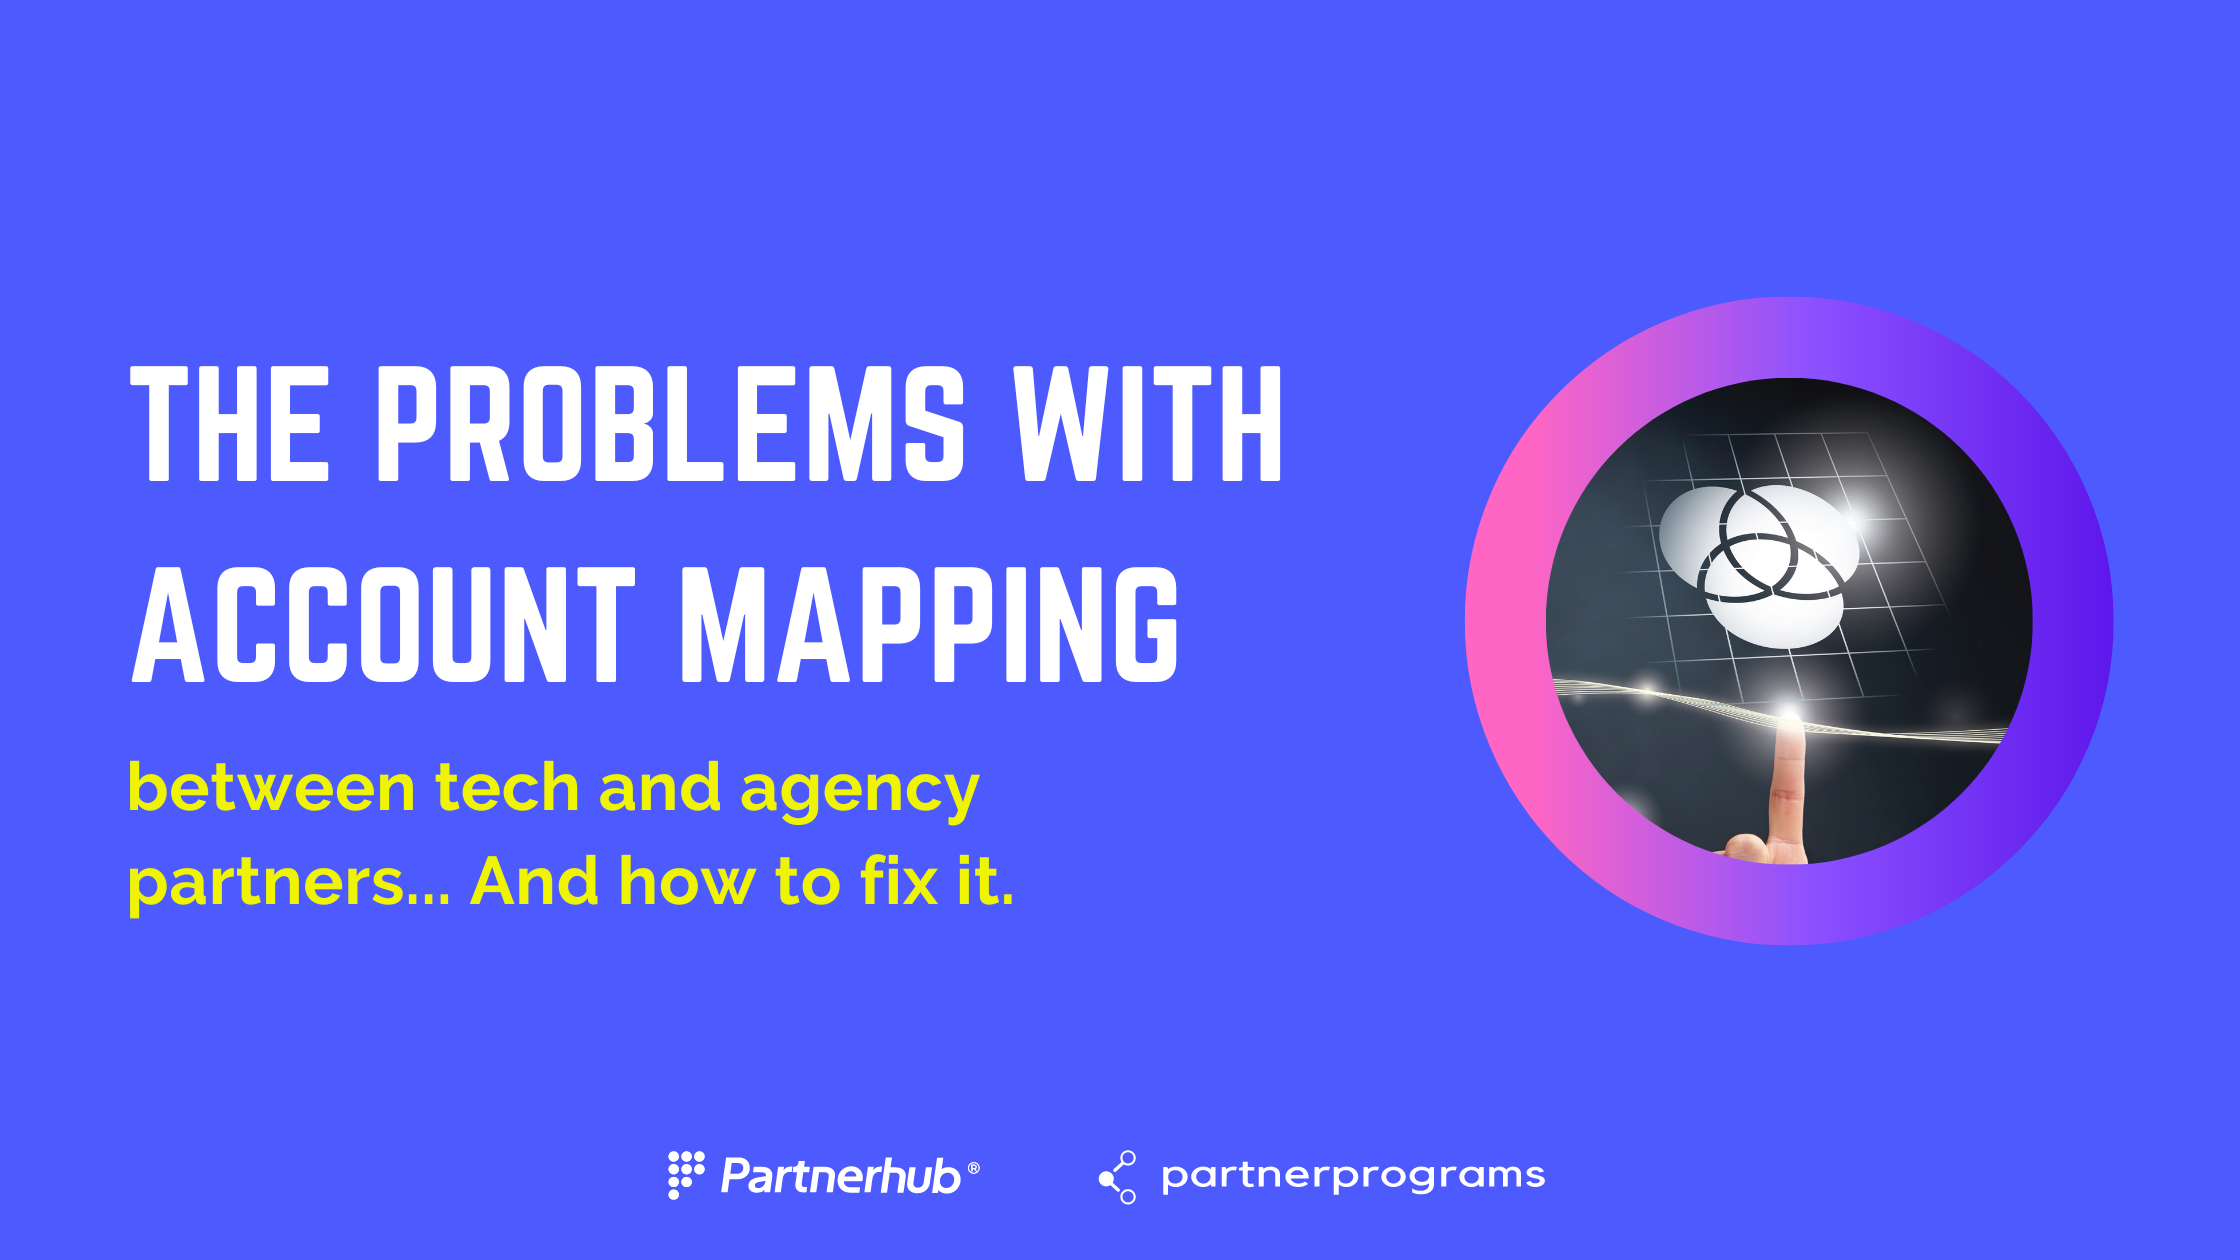 The problems with account mapping